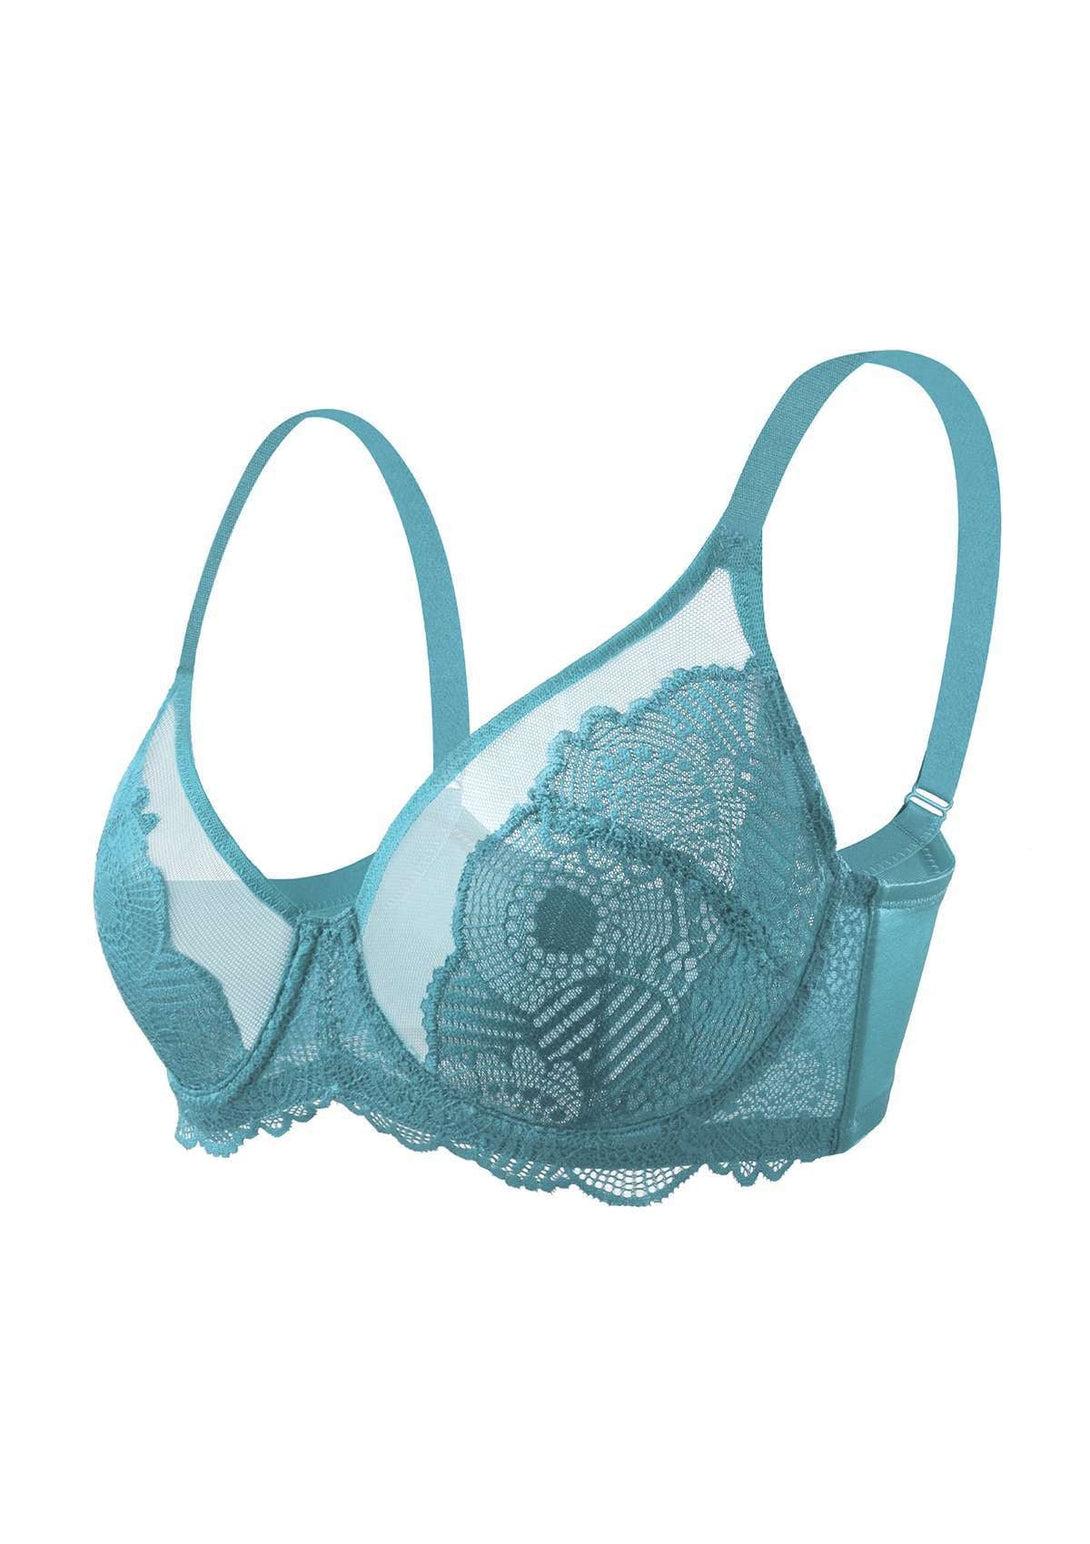 Barely breezies embroidered microfiber bra style A72247 turquoise